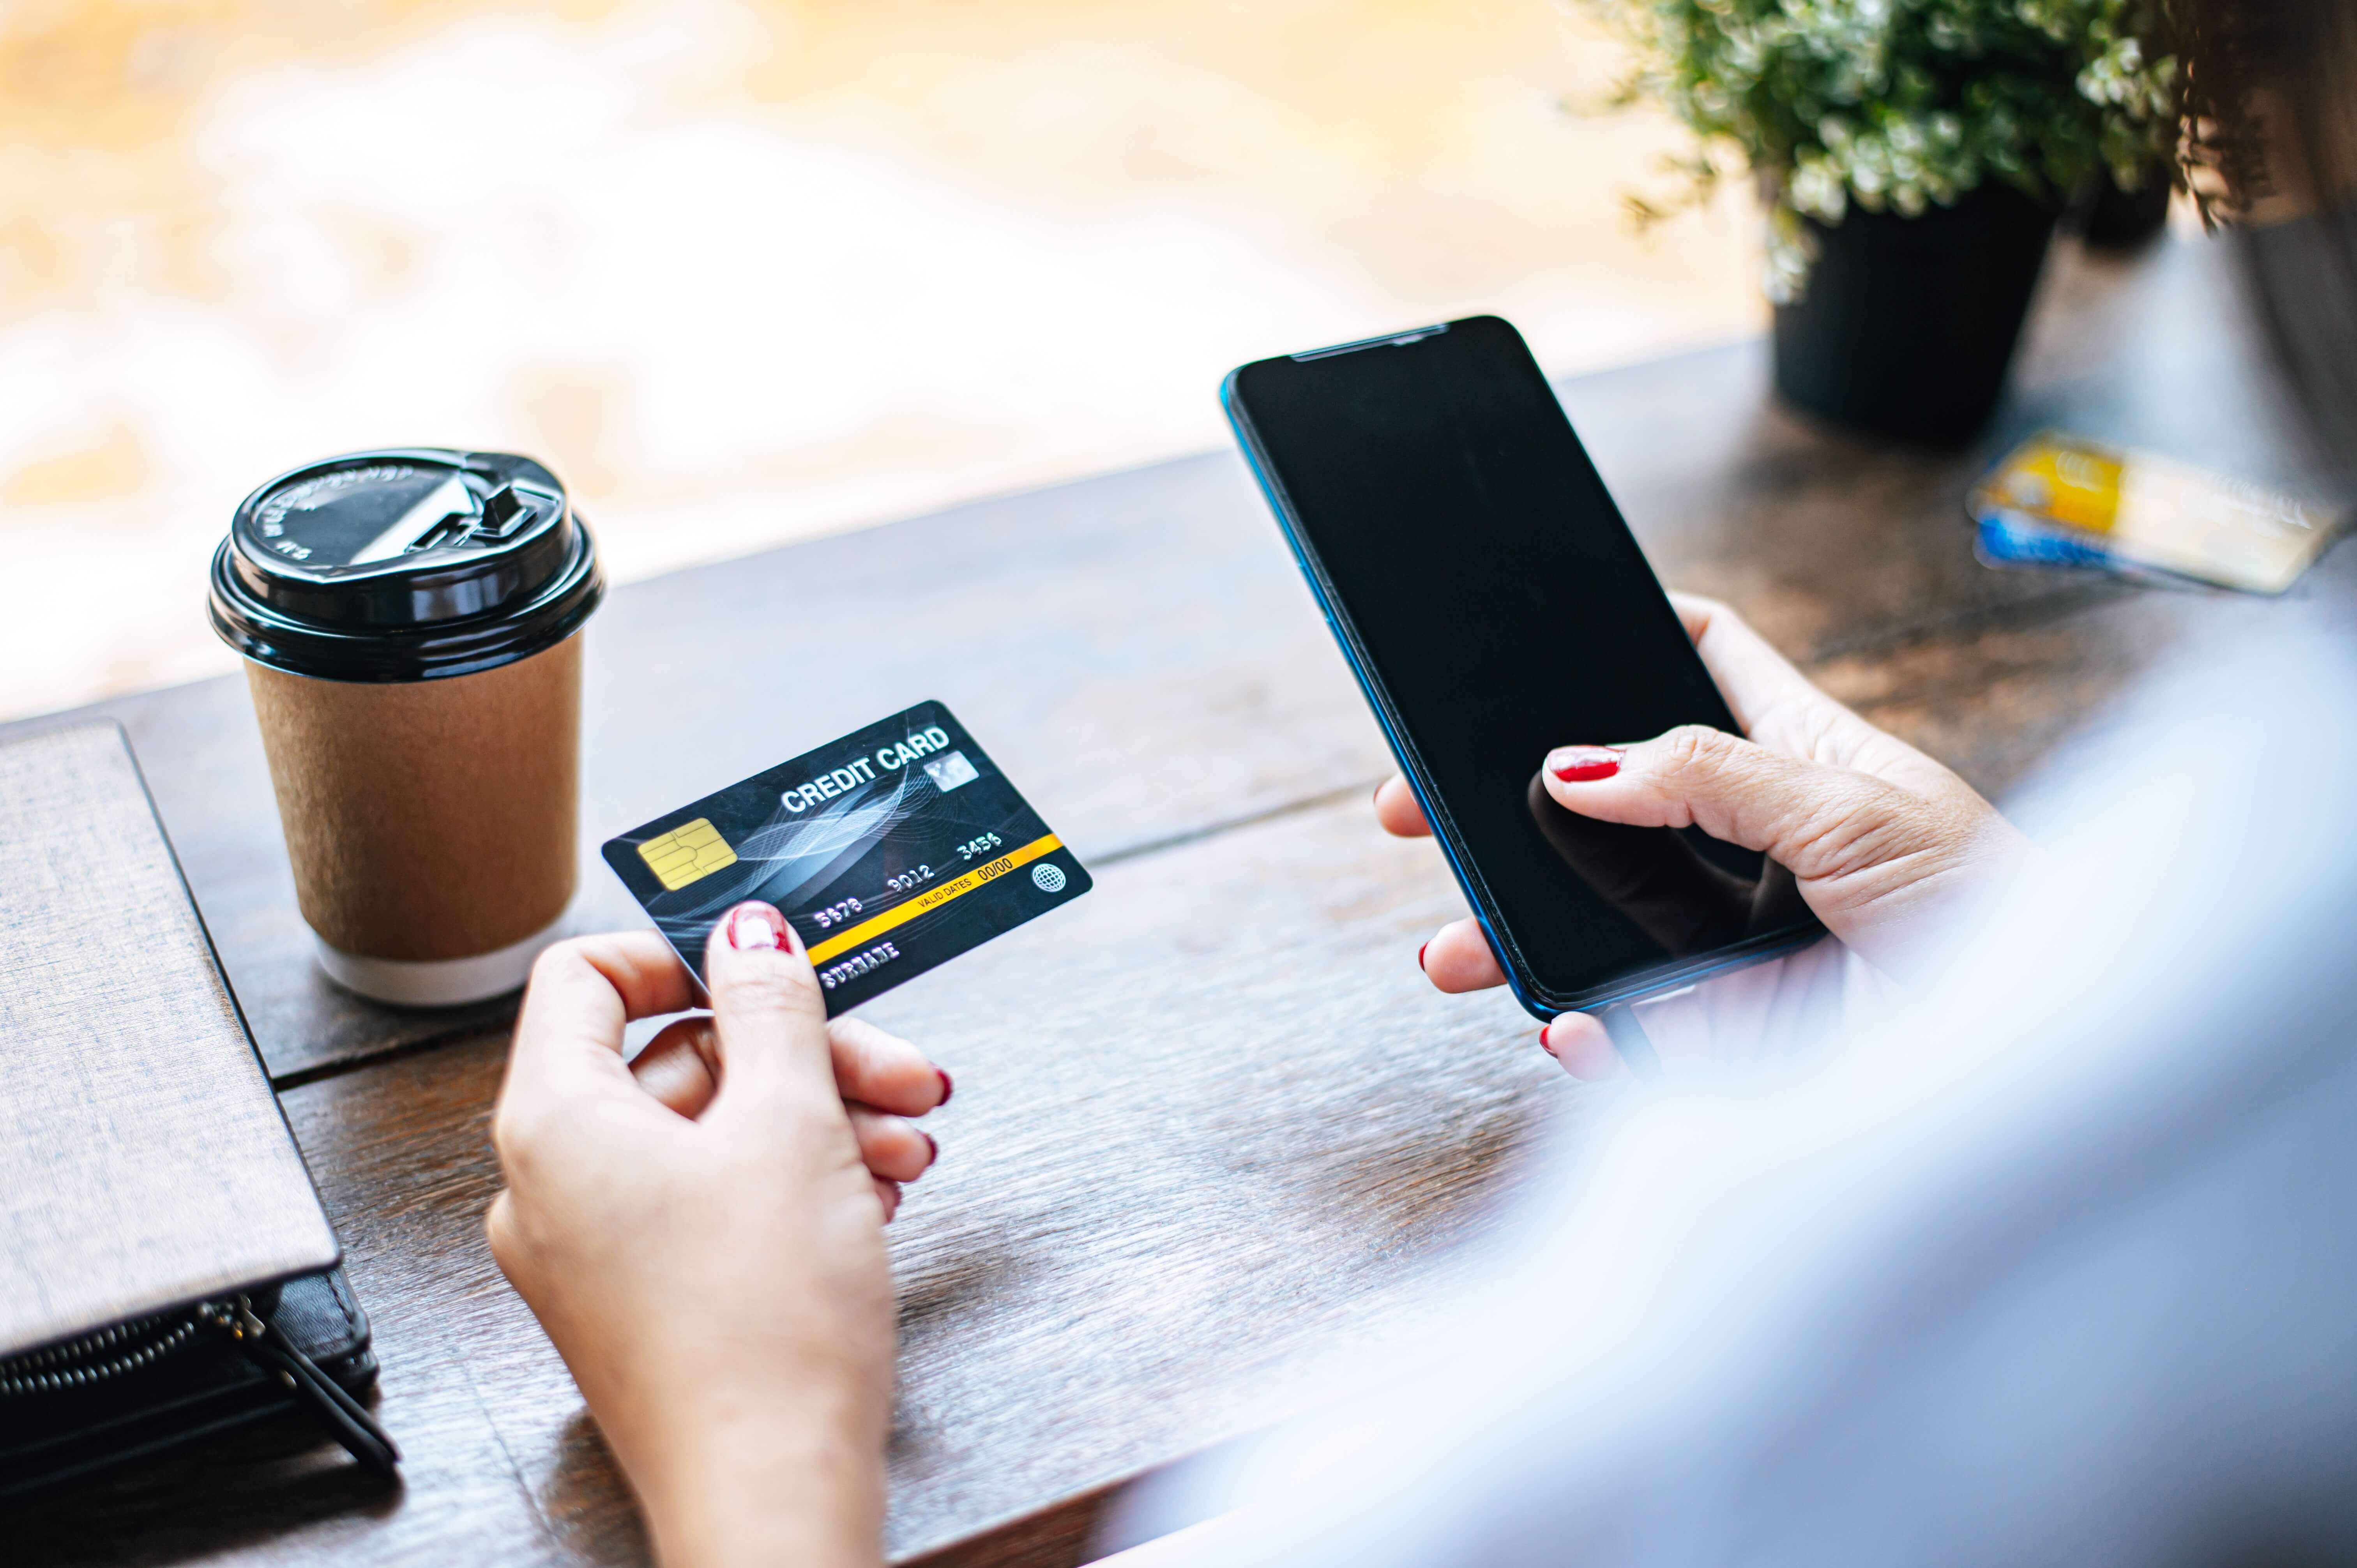 Understanding the usage and cross-sell potential of a credit card bill payment app 